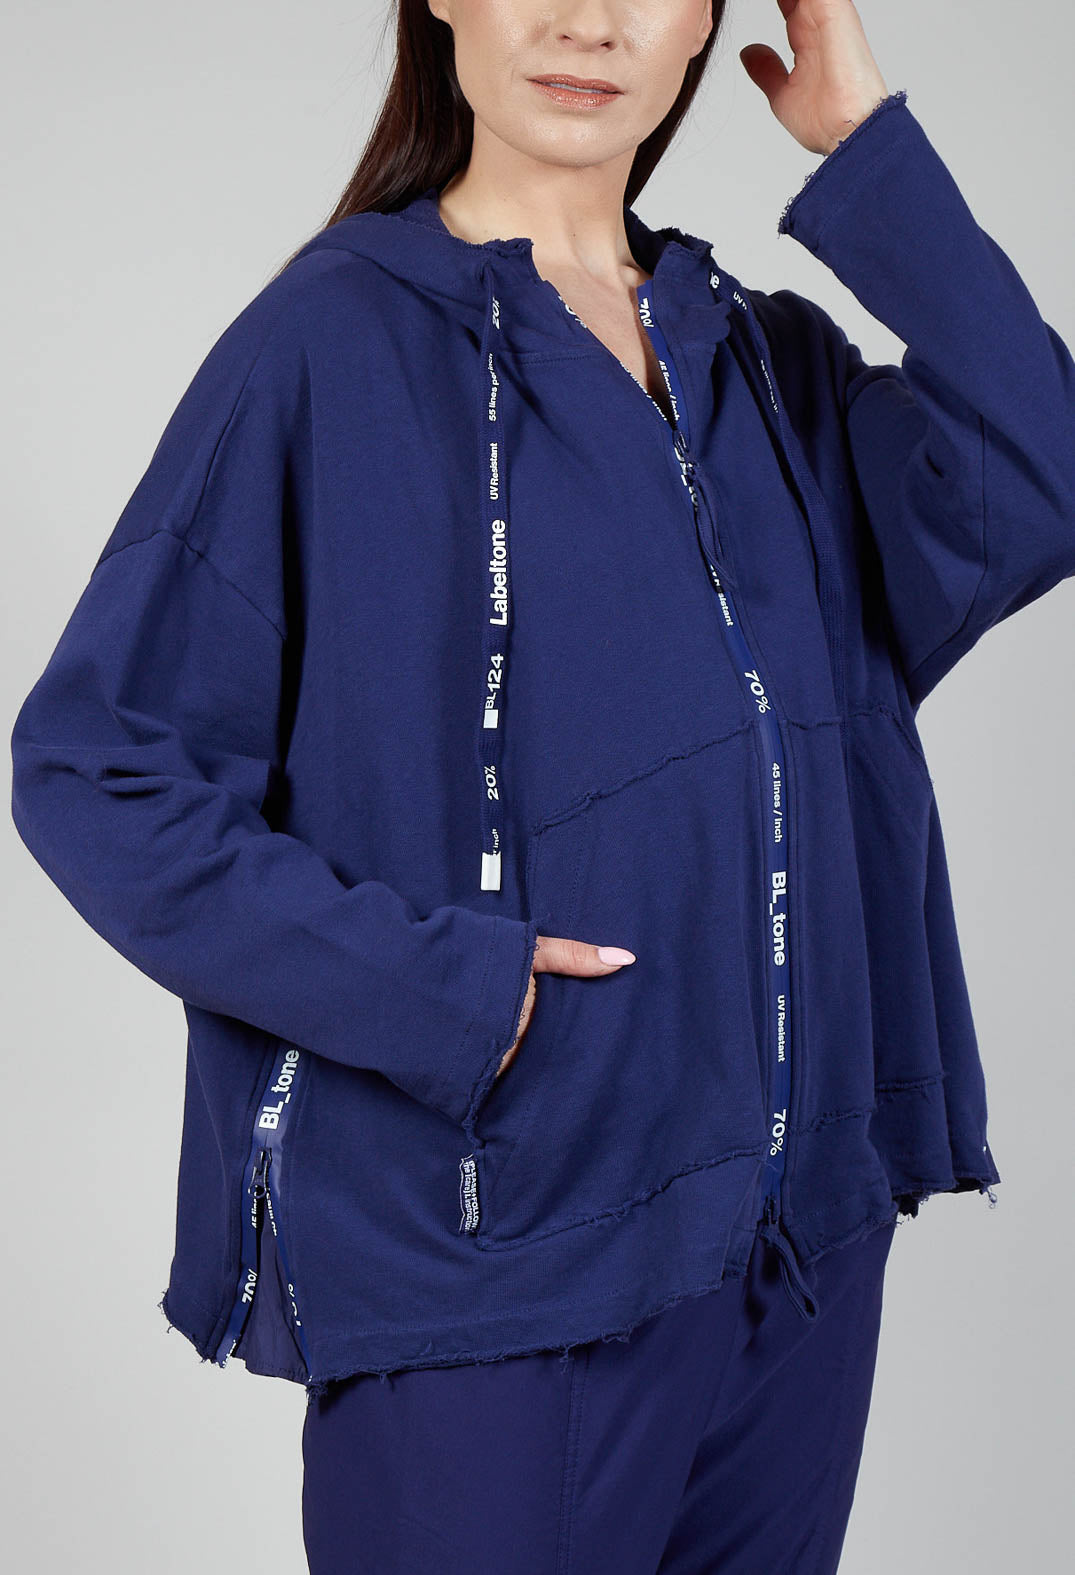 Jersey Jacket with Hood in Azur